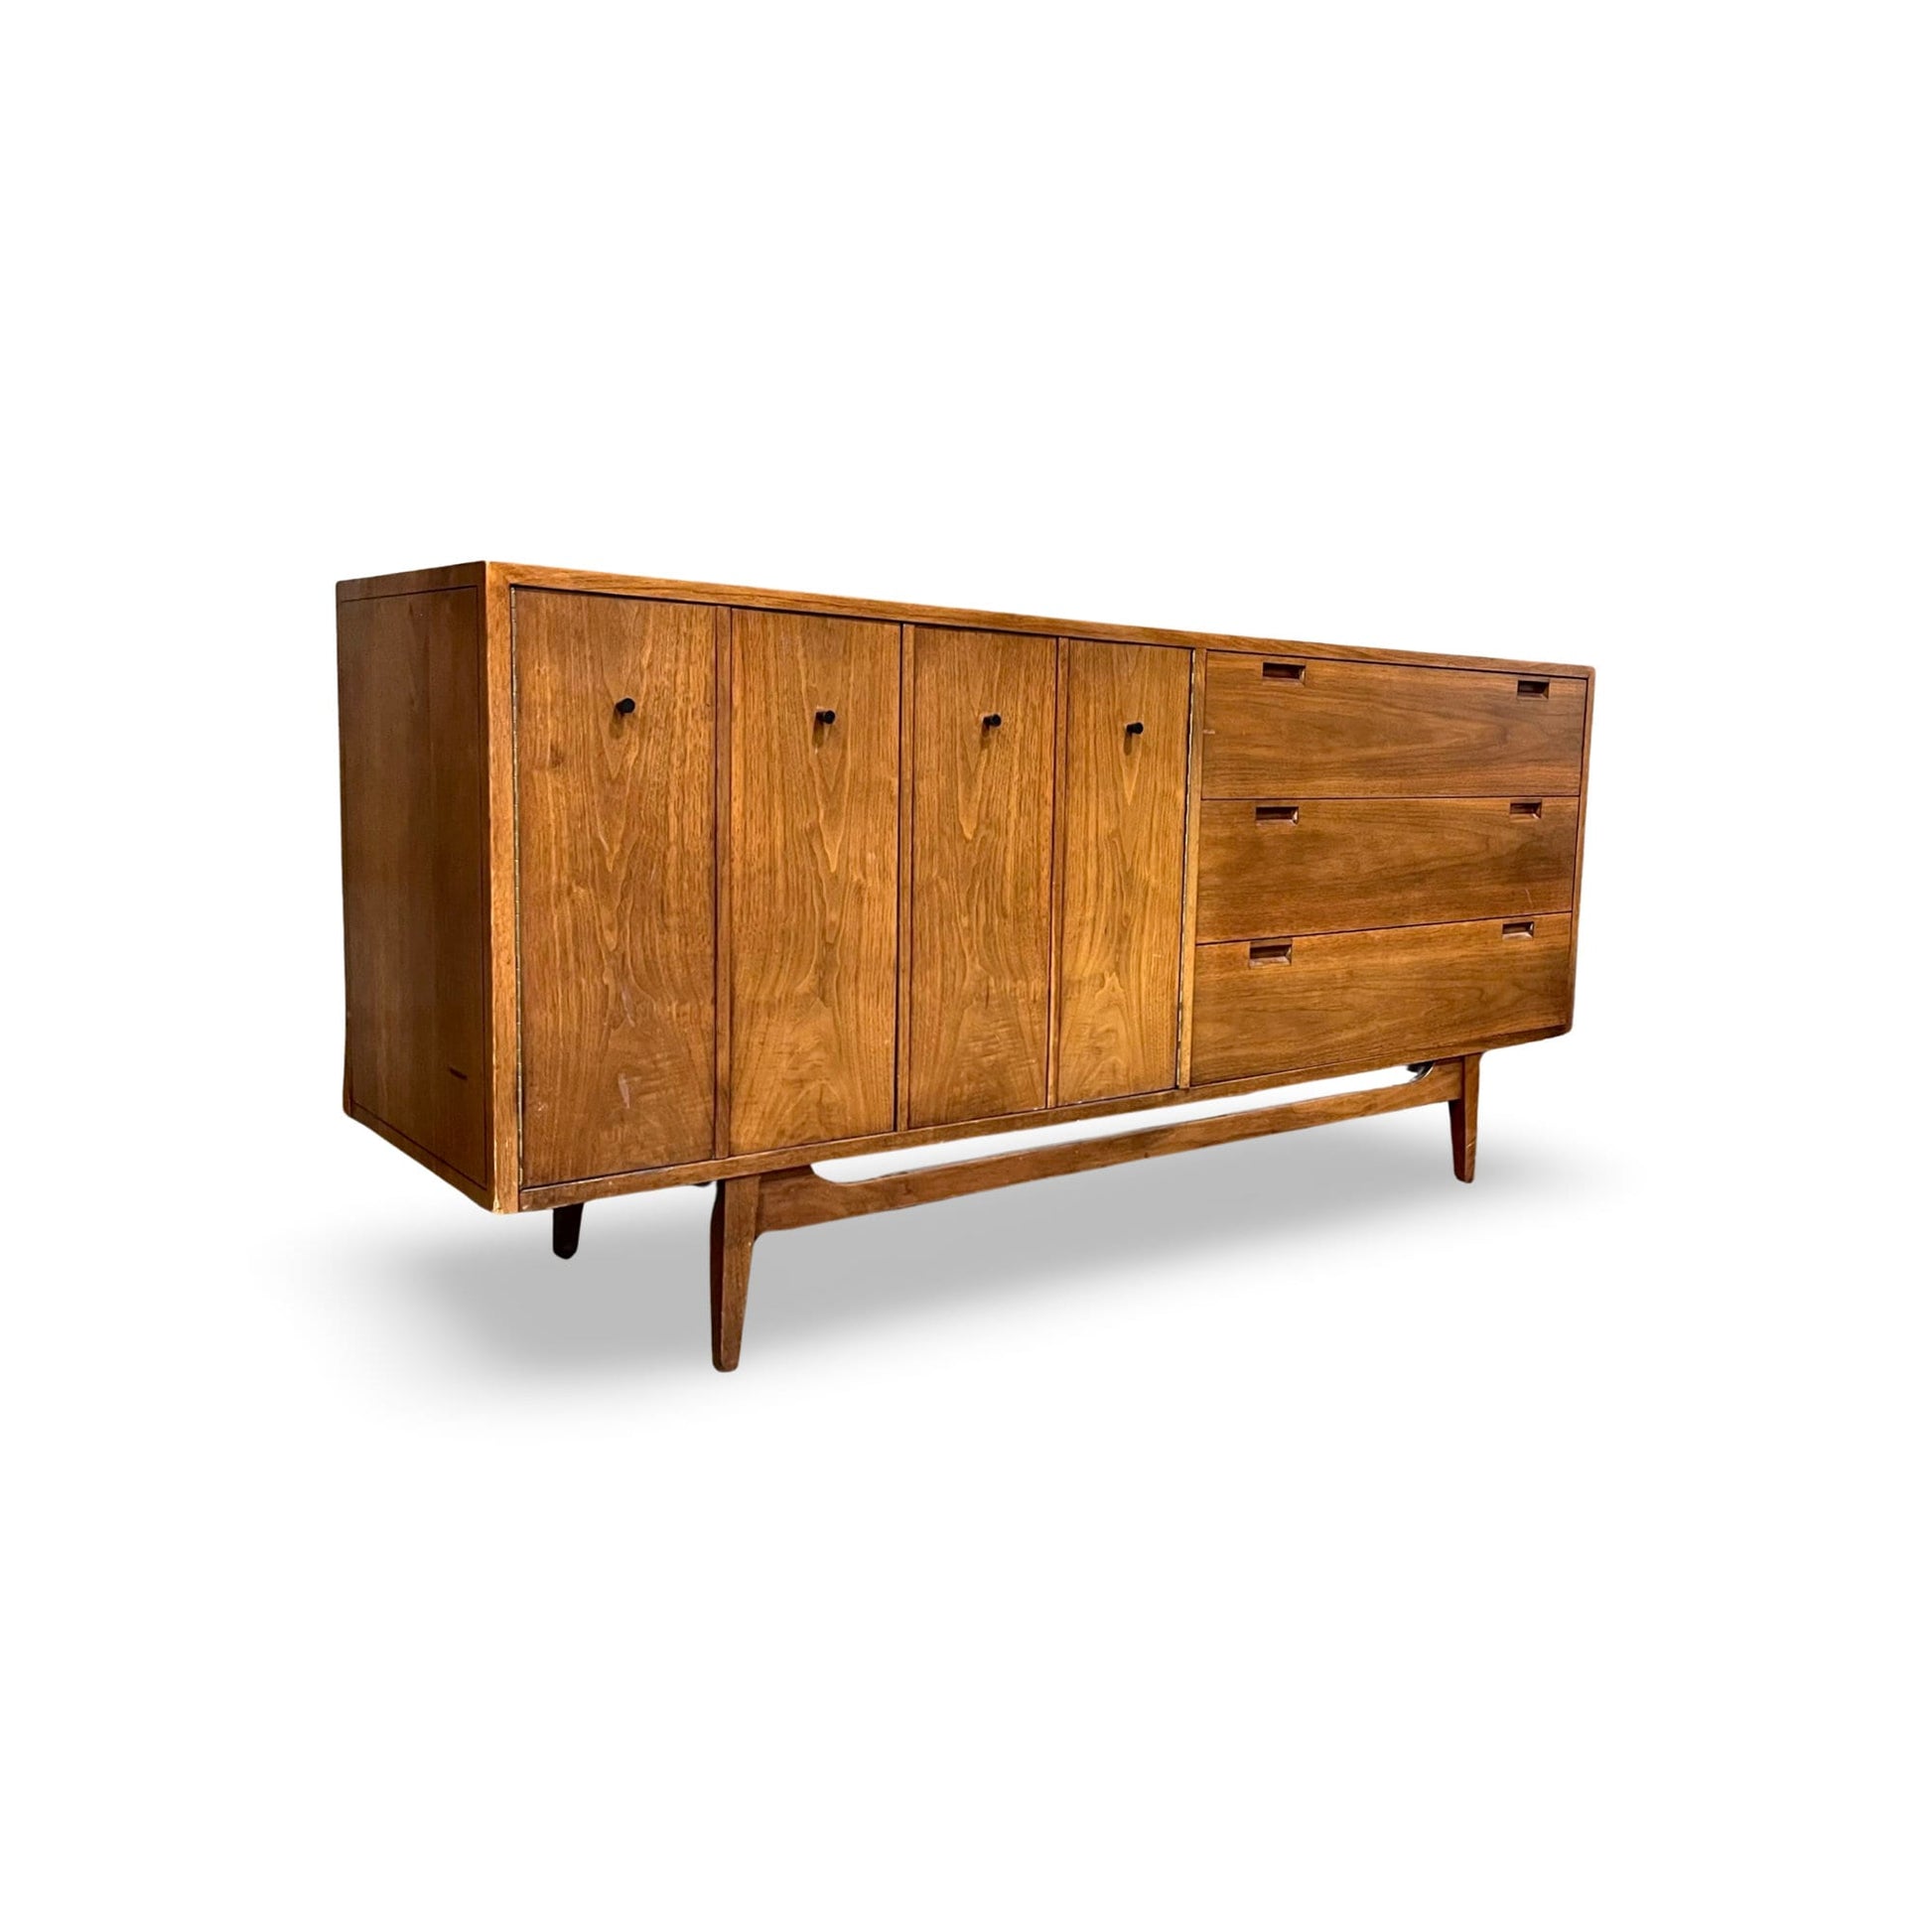 Mid-century Modern bedroom collection including nightstands, dressers, and headboard.